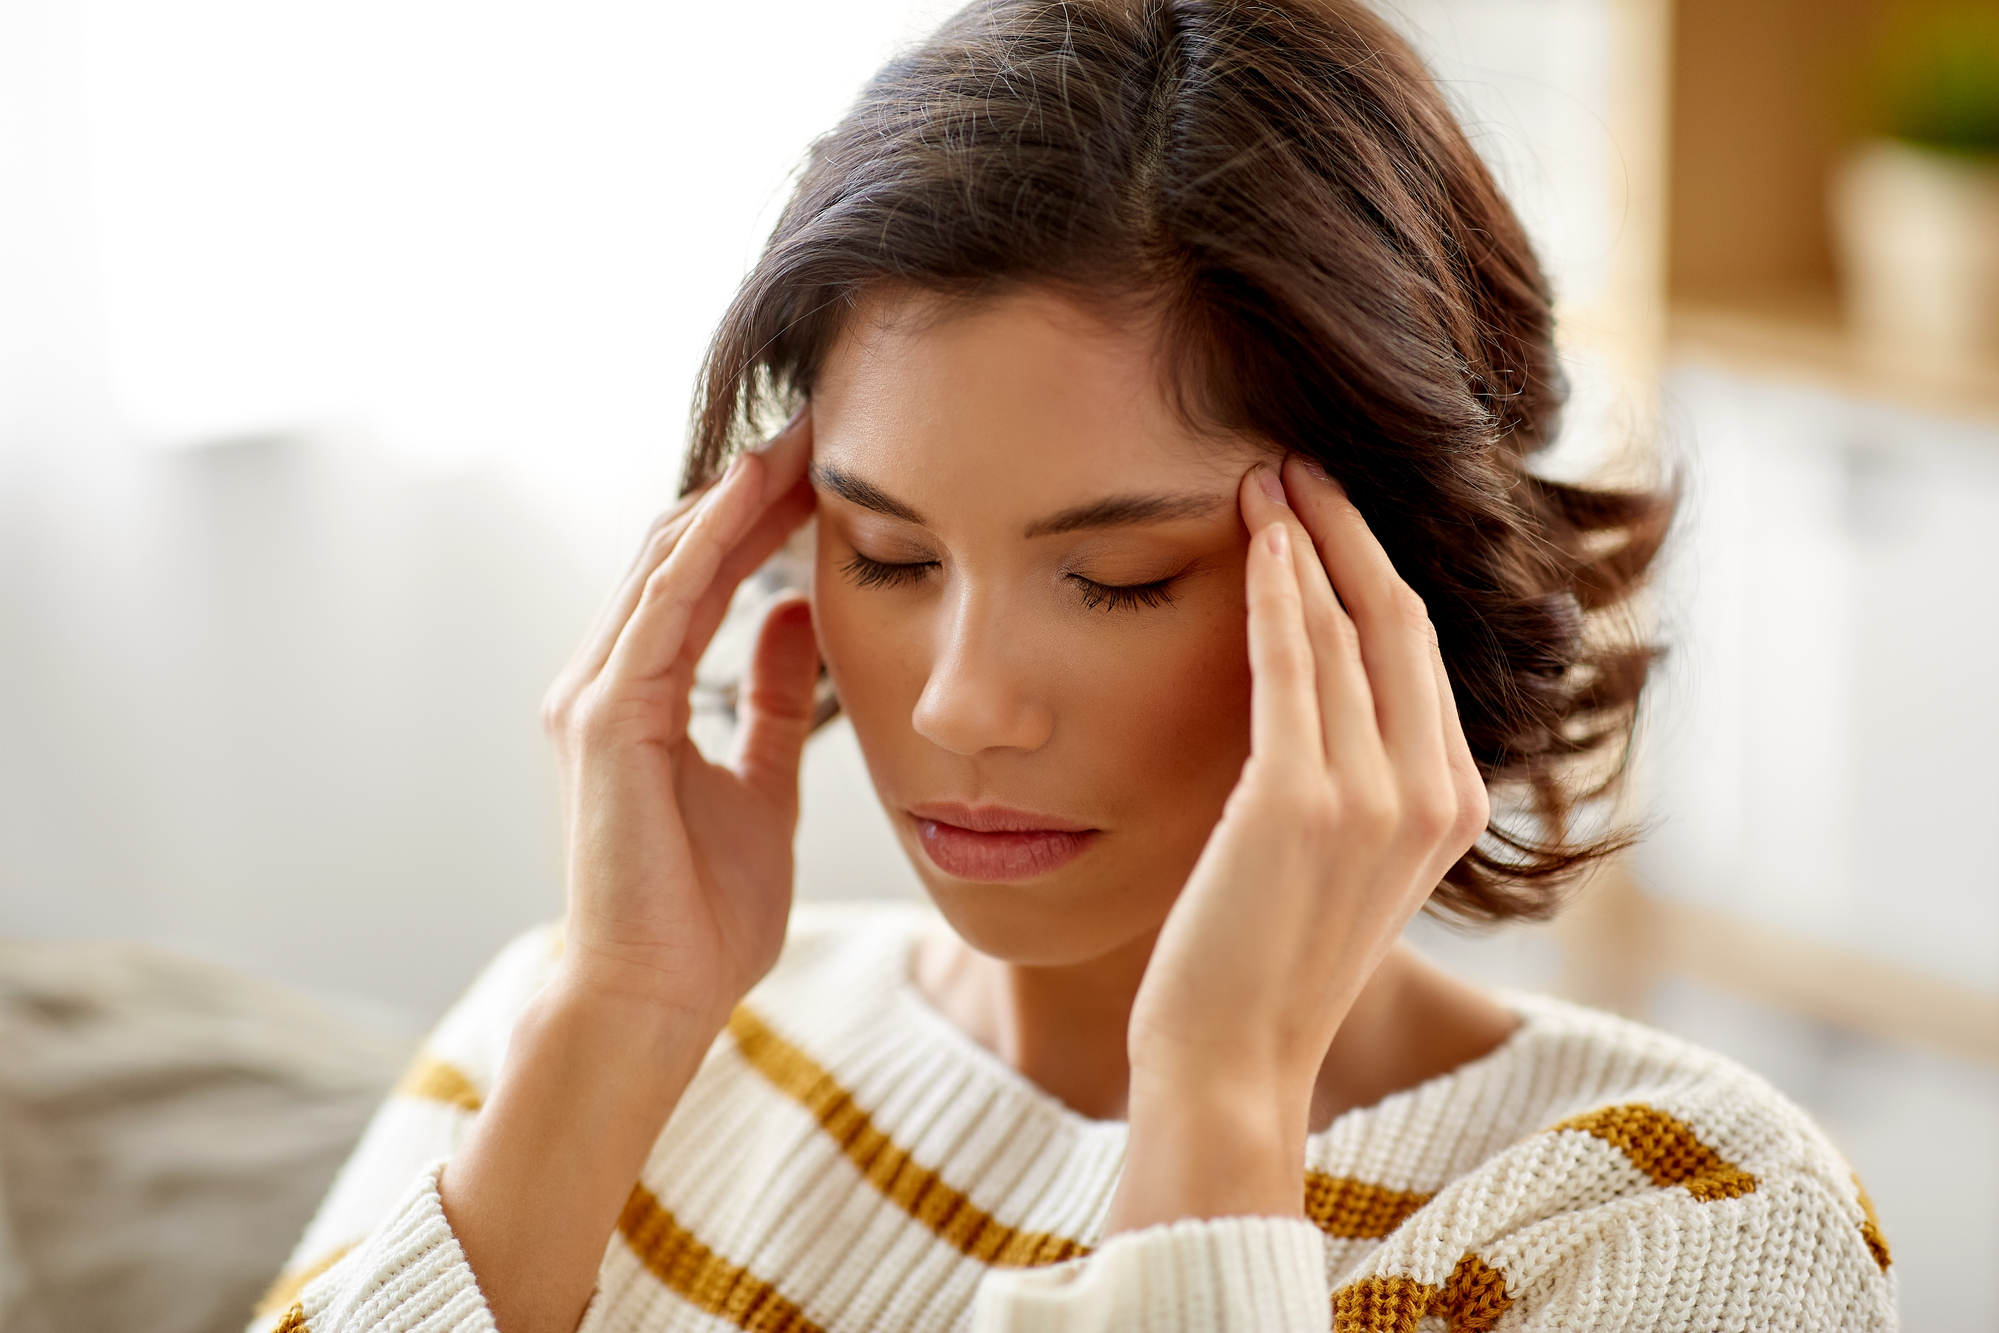 Botox, whose chemical name is onabotulinum toxin A, was licensed by the FDA in 2010 for the treatment of recurrent migraines.